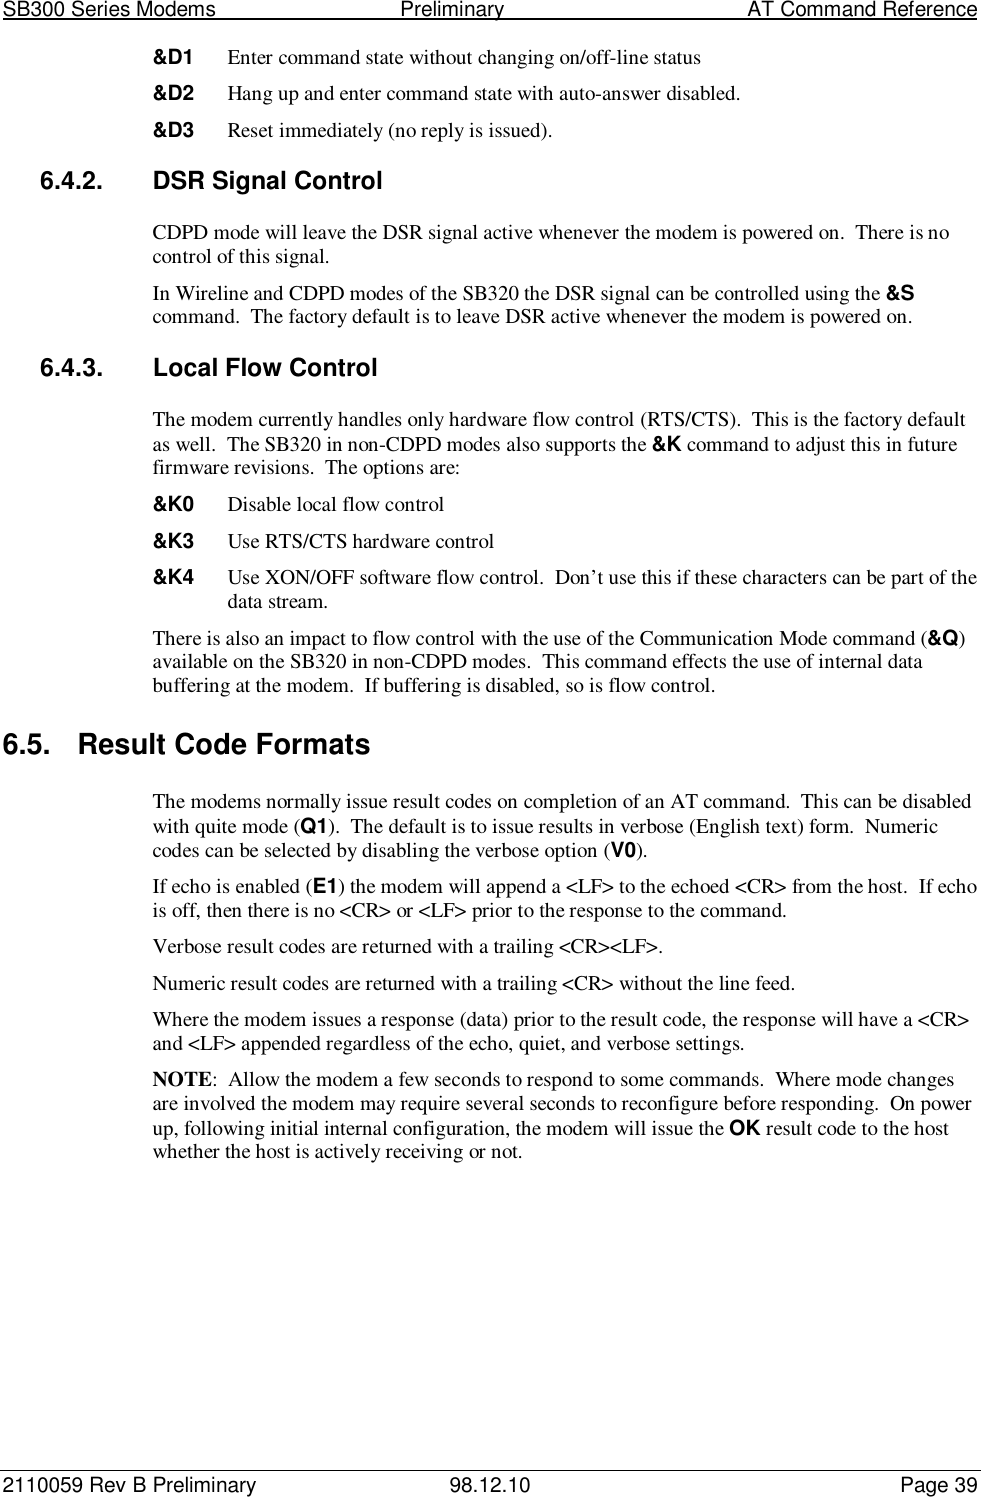 SB300 Series Modems                                  Preliminary                                         AT Command Reference2110059 Rev B Preliminary 98.12.10 Page 39&amp;D1 Enter command state without changing on/off-line status&amp;D2 Hang up and enter command state with auto-answer disabled.&amp;D3 Reset immediately (no reply is issued).6.4.2.  DSR Signal ControlCDPD mode will leave the DSR signal active whenever the modem is powered on.  There is nocontrol of this signal.In Wireline and CDPD modes of the SB320 the DSR signal can be controlled using the &amp;Scommand.  The factory default is to leave DSR active whenever the modem is powered on.6.4.3.  Local Flow ControlThe modem currently handles only hardware flow control (RTS/CTS).  This is the factory defaultas well.  The SB320 in non-CDPD modes also supports the &amp;K command to adjust this in futurefirmware revisions.  The options are:&amp;K0 Disable local flow control&amp;K3 Use RTS/CTS hardware control&amp;K4 Use XON/OFF software flow control.  Don’t use this if these characters can be part of thedata stream.There is also an impact to flow control with the use of the Communication Mode command (&amp;Q)available on the SB320 in non-CDPD modes.  This command effects the use of internal databuffering at the modem.  If buffering is disabled, so is flow control.6.5.  Result Code FormatsThe modems normally issue result codes on completion of an AT command.  This can be disabledwith quite mode (Q1).  The default is to issue results in verbose (English text) form.  Numericcodes can be selected by disabling the verbose option (V0).If echo is enabled (E1) the modem will append a &lt;LF&gt; to the echoed &lt;CR&gt; from the host.  If echois off, then there is no &lt;CR&gt; or &lt;LF&gt; prior to the response to the command.Verbose result codes are returned with a trailing &lt;CR&gt;&lt;LF&gt;.Numeric result codes are returned with a trailing &lt;CR&gt; without the line feed.Where the modem issues a response (data) prior to the result code, the response will have a &lt;CR&gt;and &lt;LF&gt; appended regardless of the echo, quiet, and verbose settings.NOTE:  Allow the modem a few seconds to respond to some commands.  Where mode changesare involved the modem may require several seconds to reconfigure before responding.  On powerup, following initial internal configuration, the modem will issue the OK result code to the hostwhether the host is actively receiving or not.